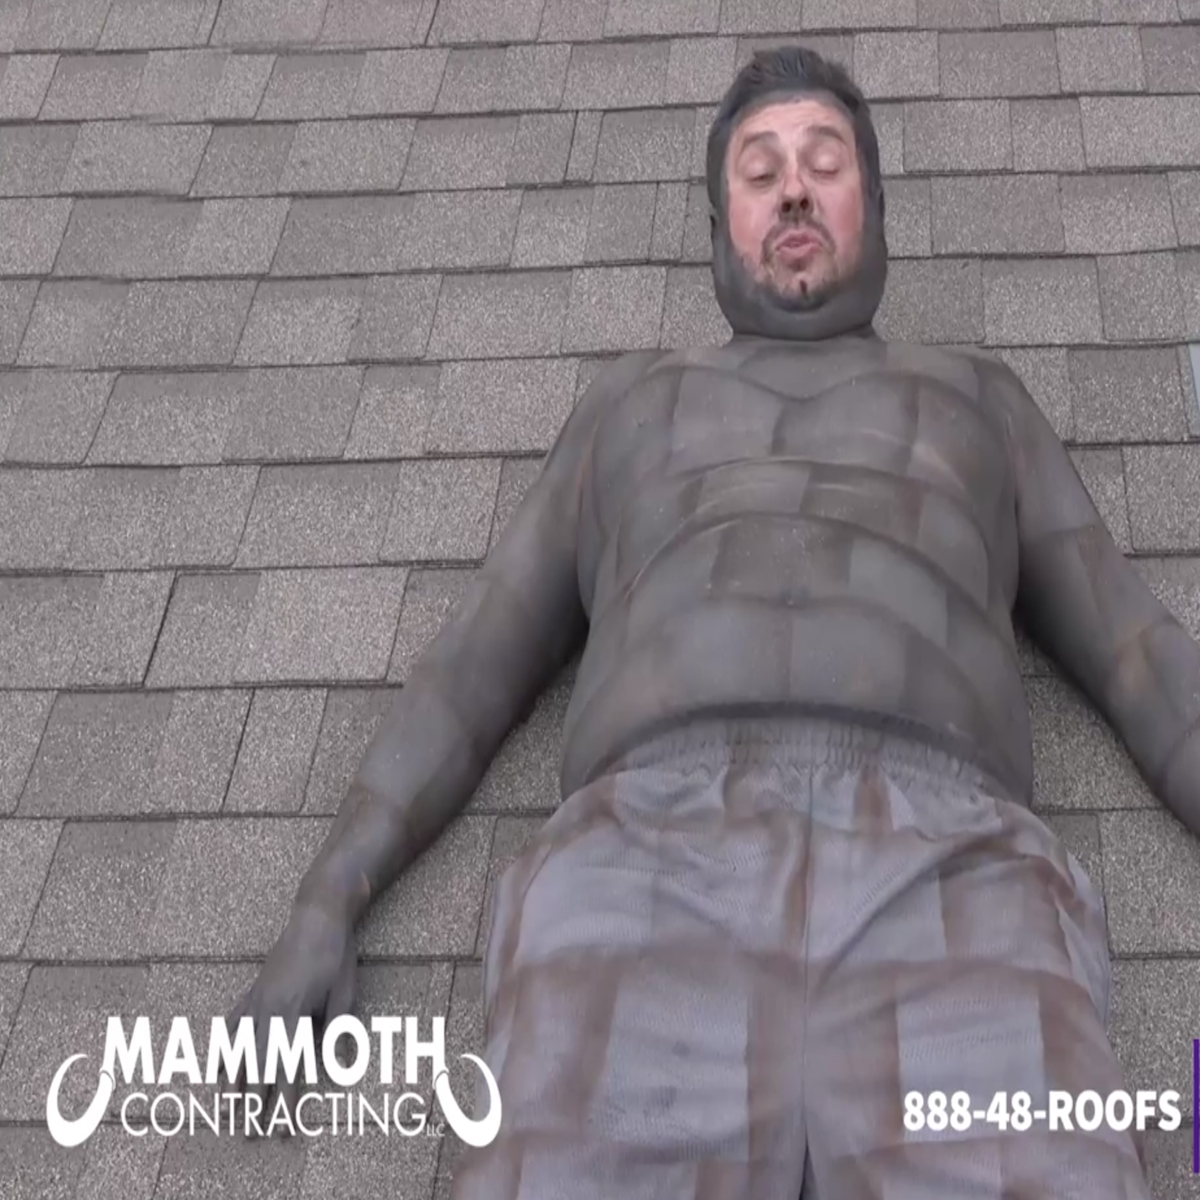 Be Nice To Your Roof